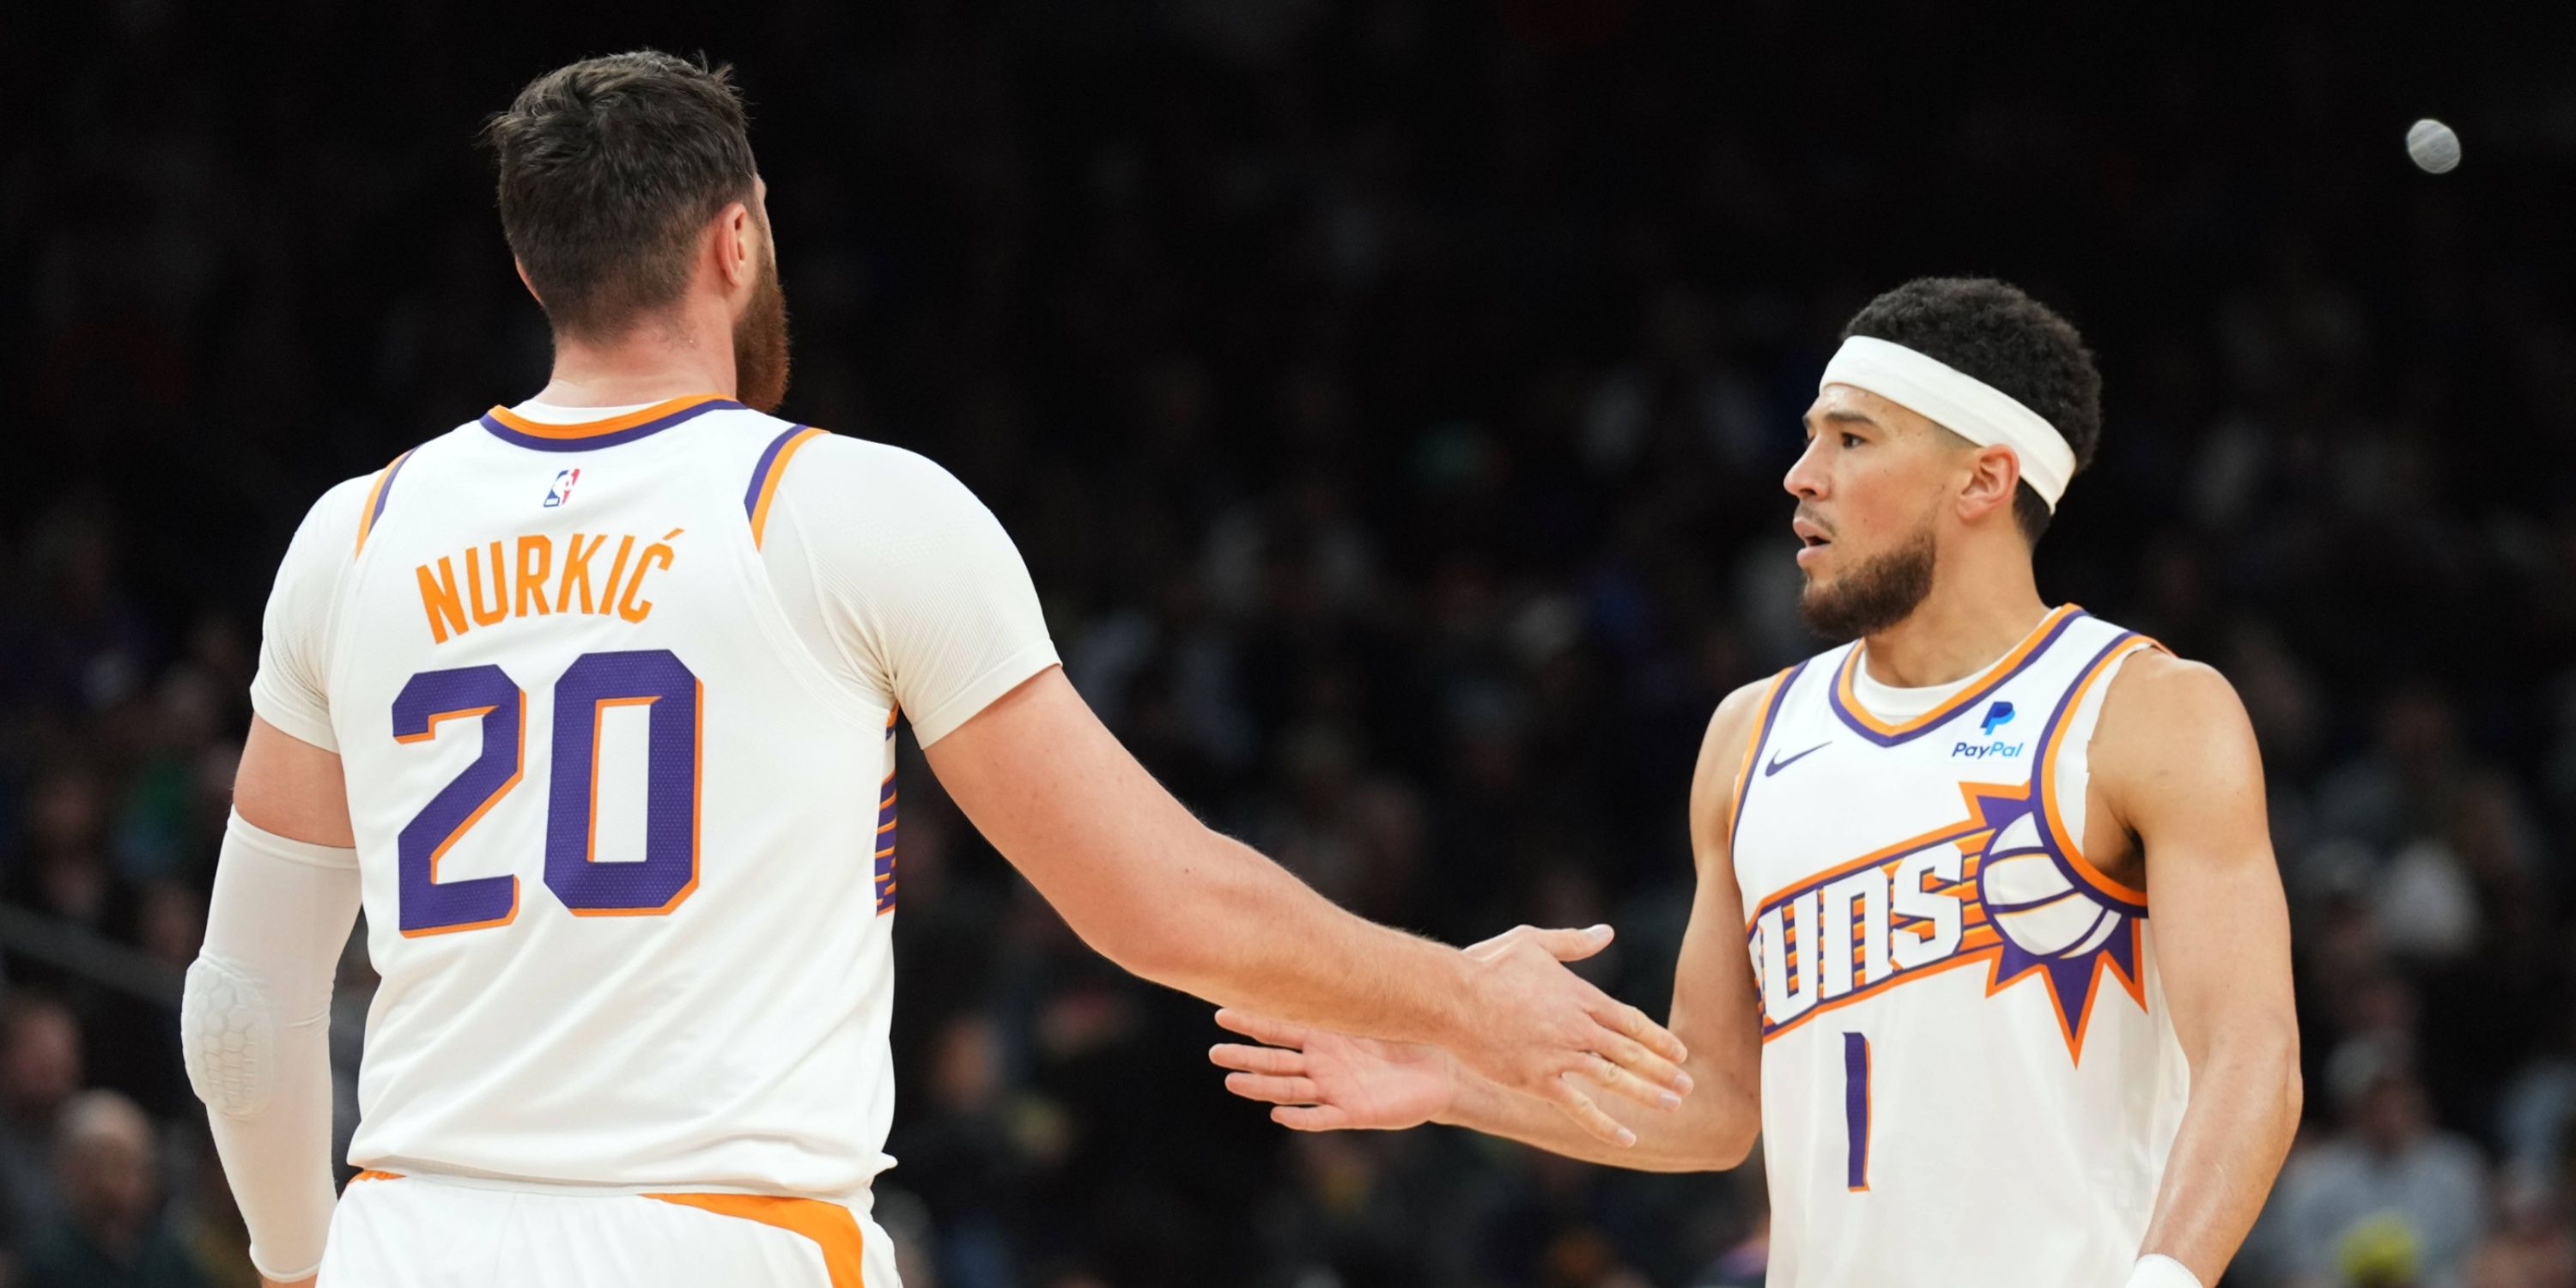 Devin Booker and Jusuf Nurkic